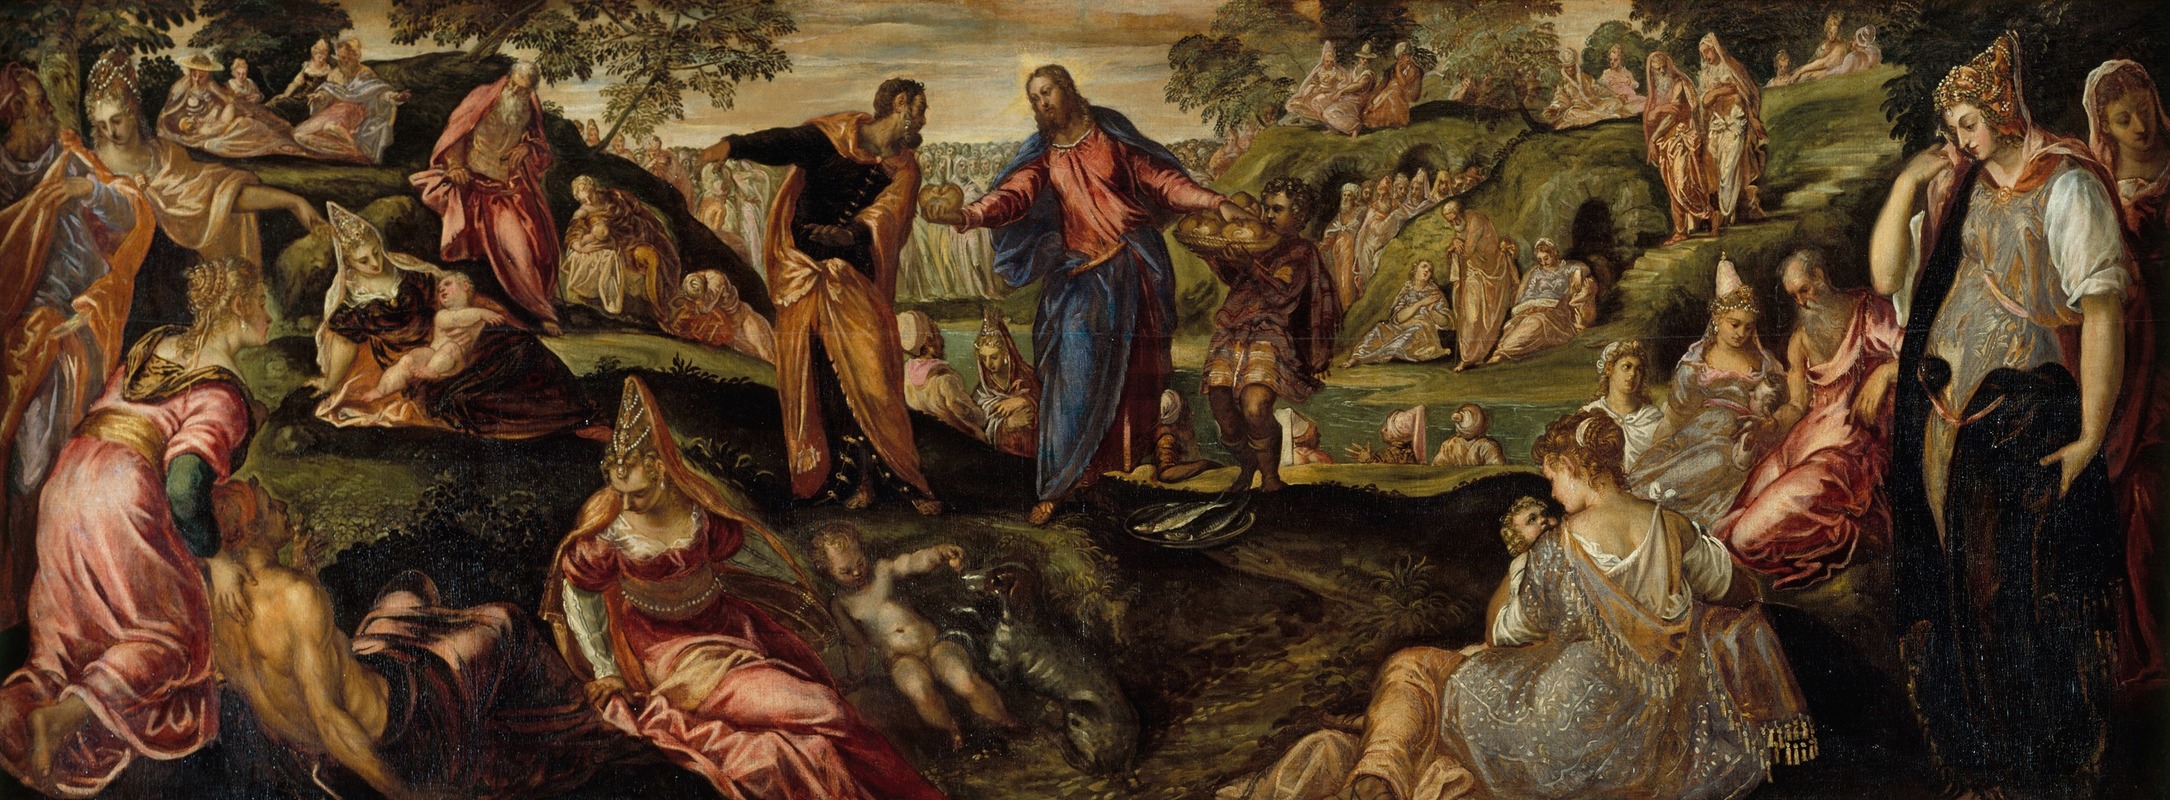 Jacopo Tintoretto - The Miracle of the Loaves and Fishes